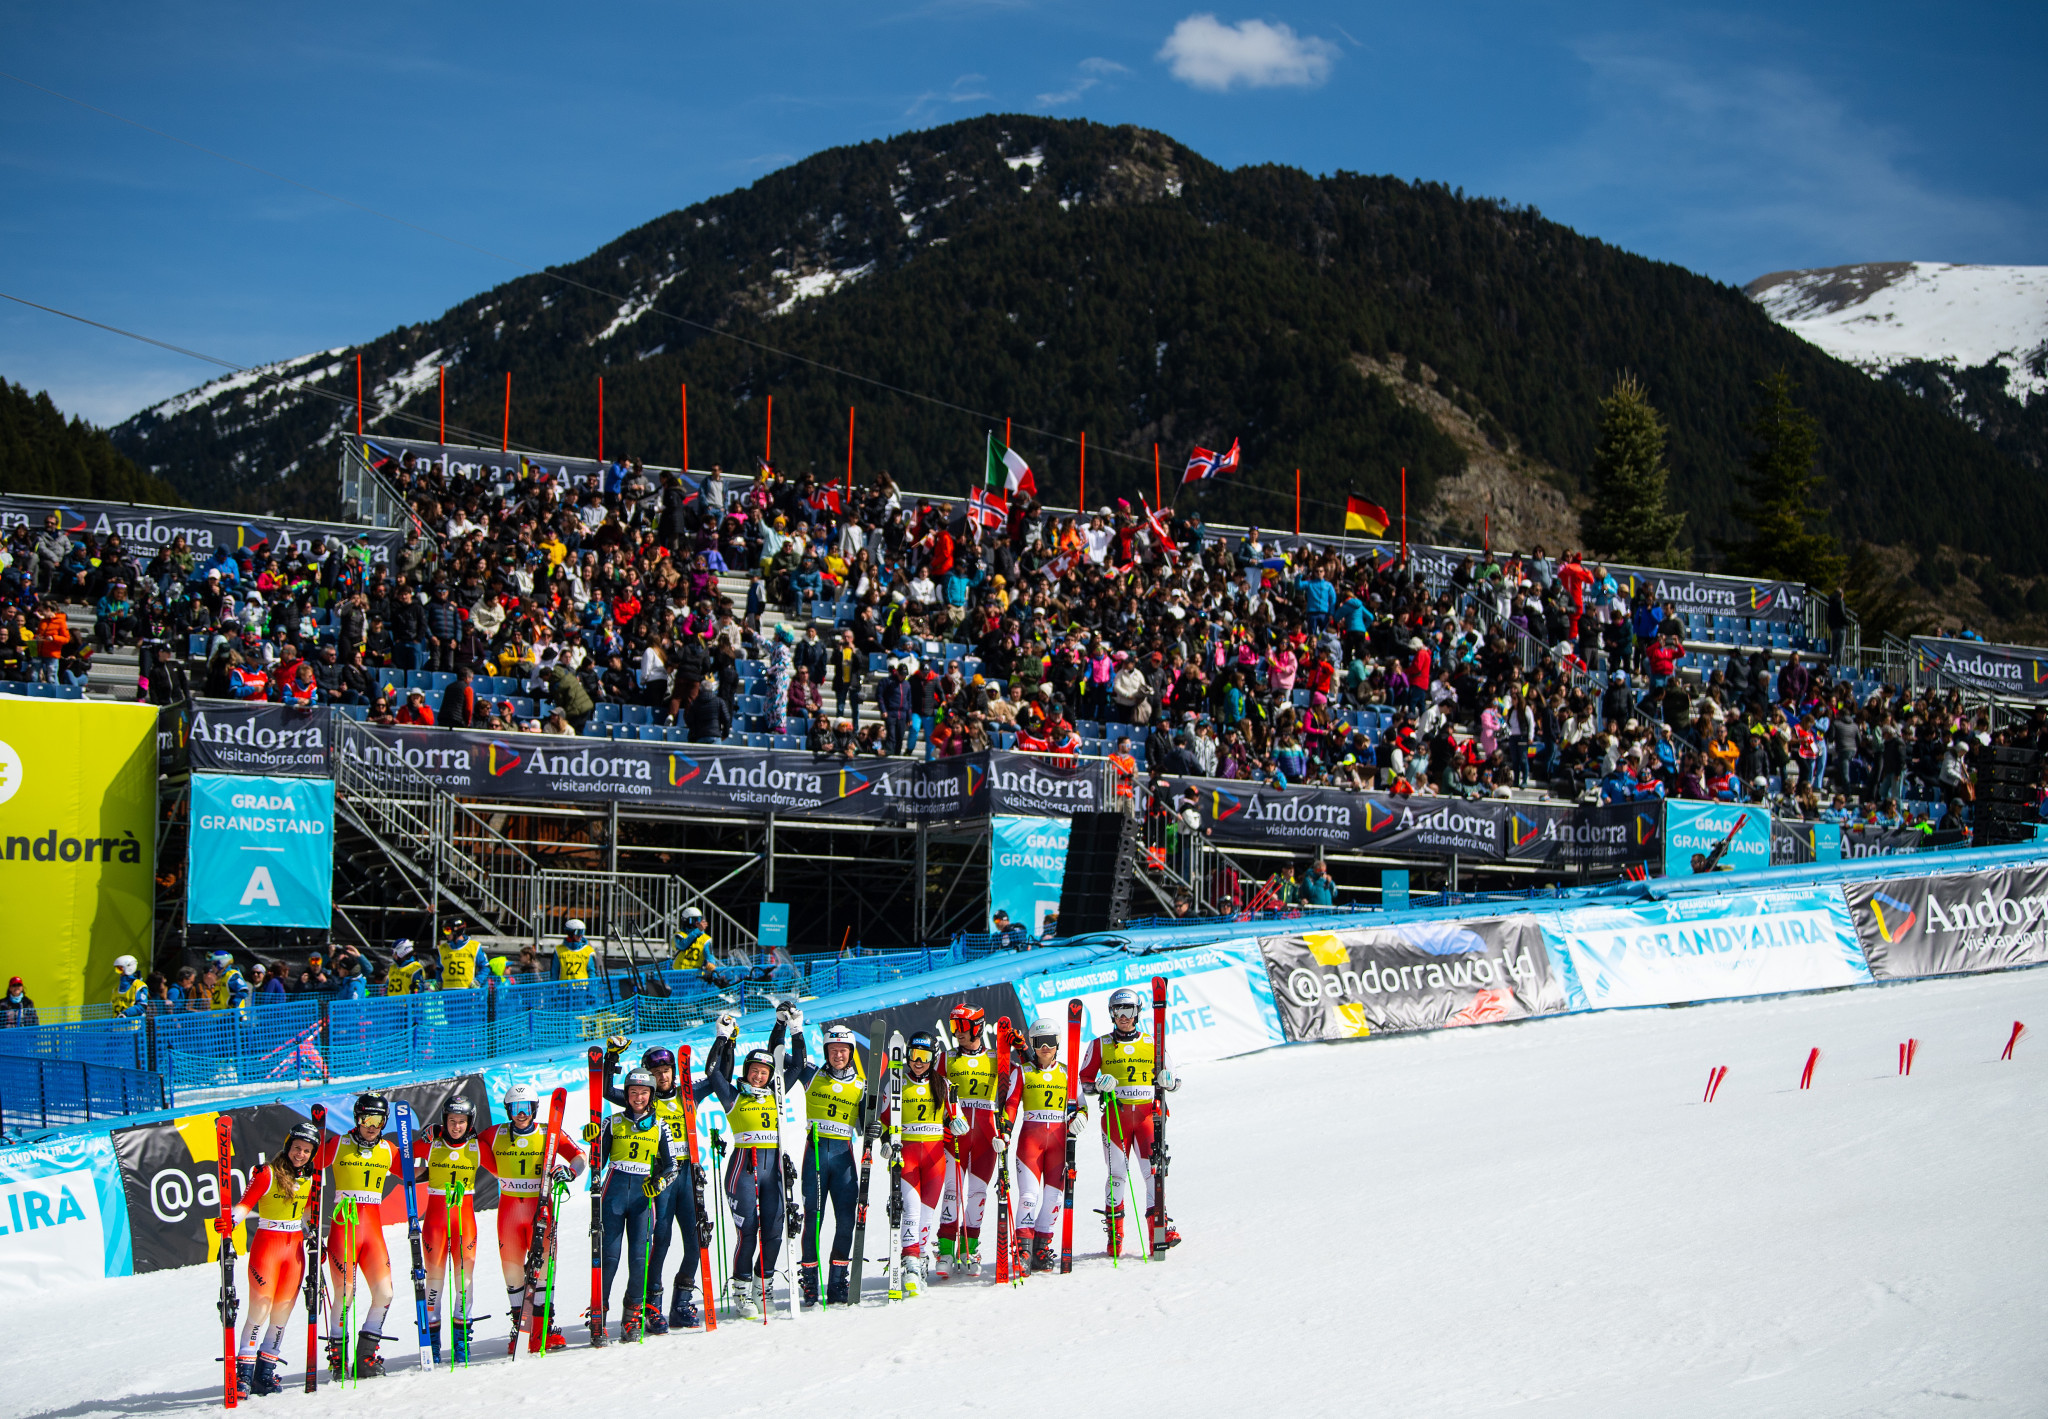 Soldeu in Andorra is a candidate for the 2029 Alpine Ski World Championships after staging this year's World Cup Finals ©Getty Images